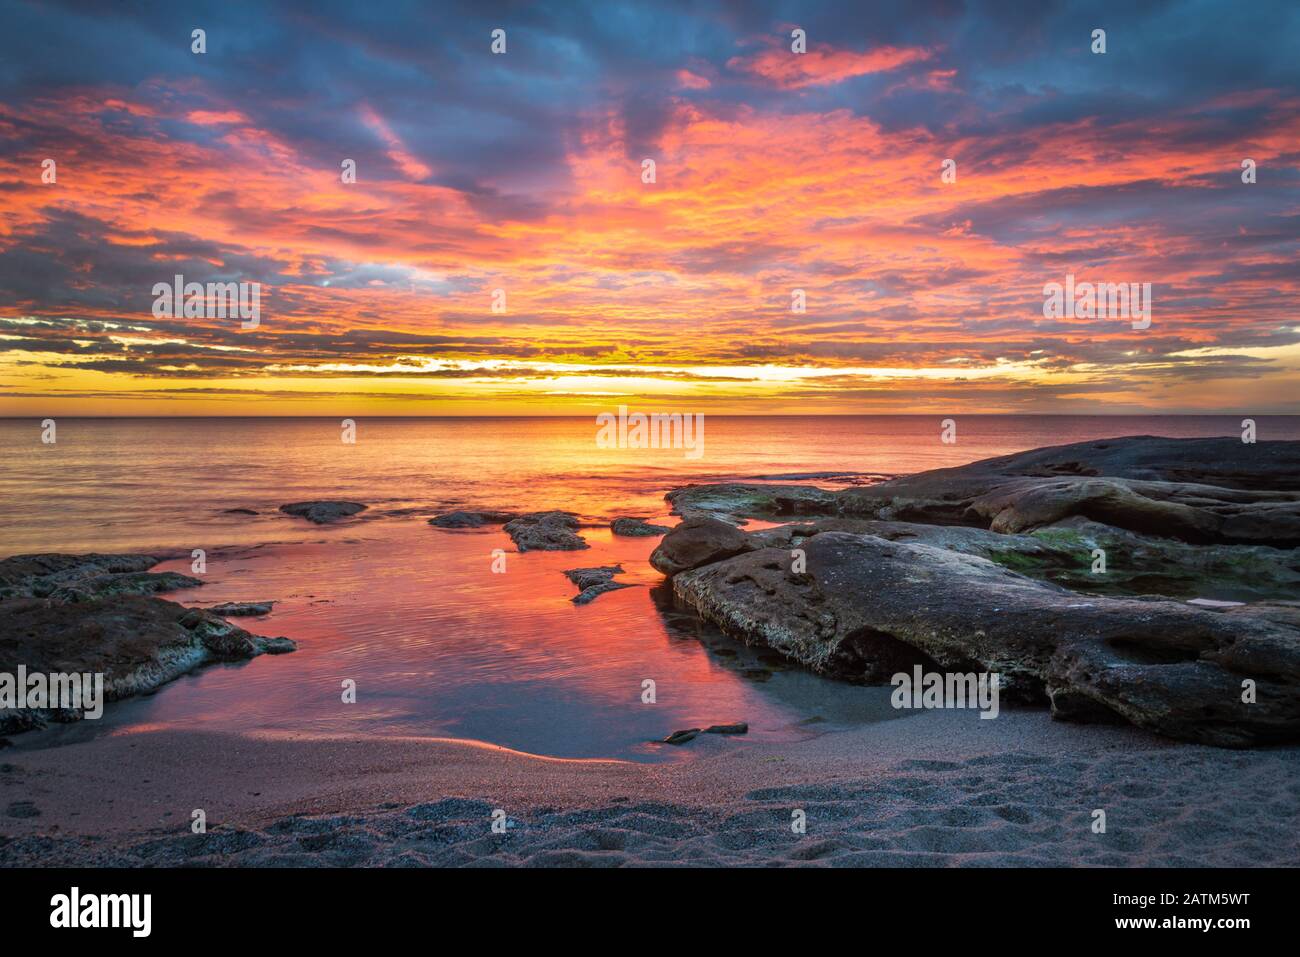 Picturesque sunrise over a rocky beach. Stock Photo